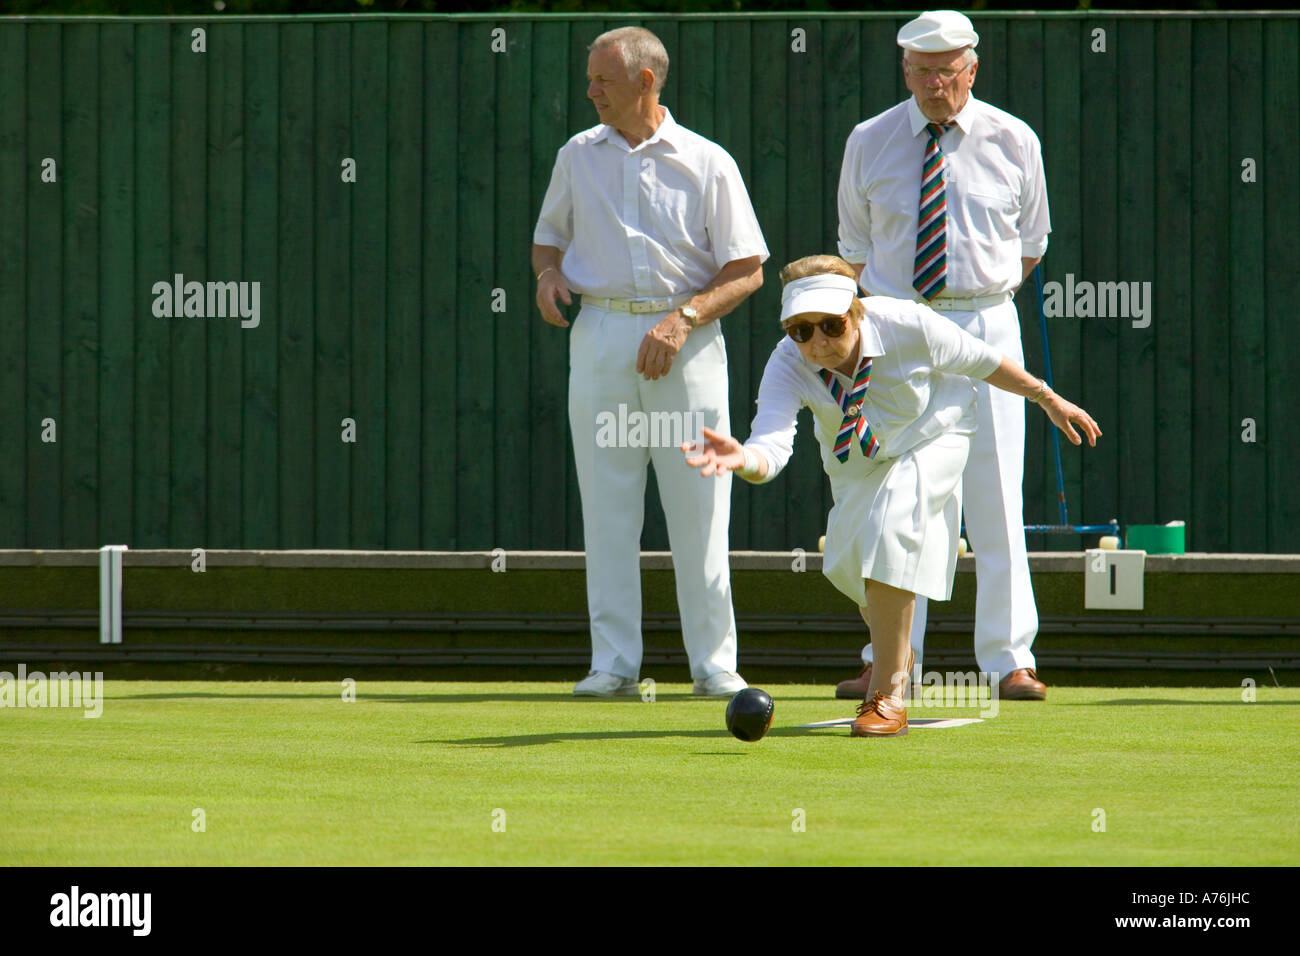 A view of the green with a female team member about to bowl. Stock Photo